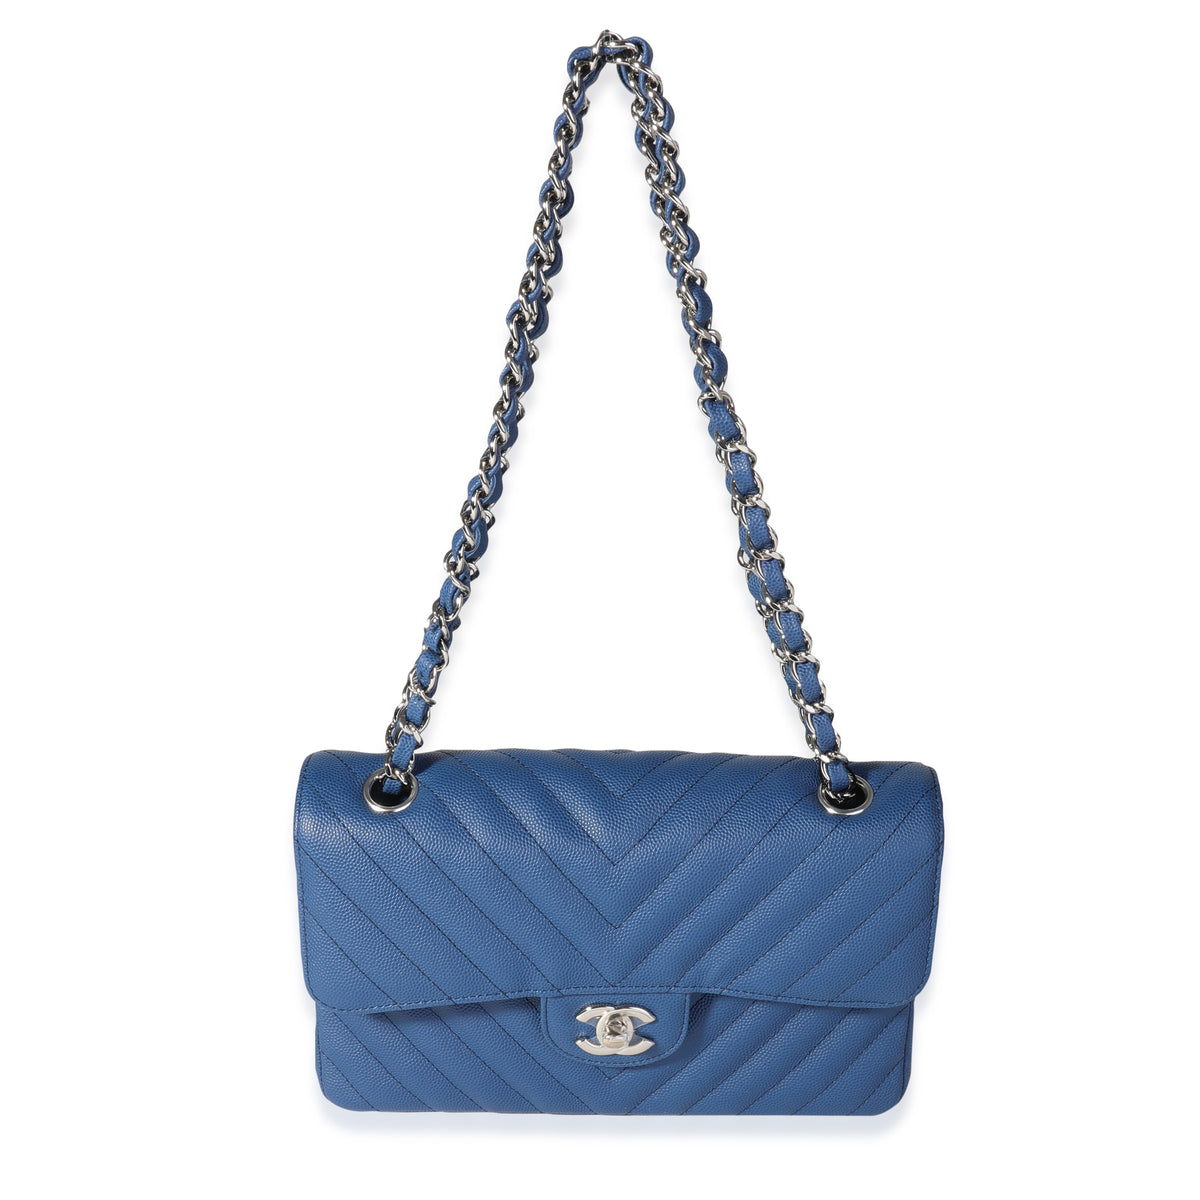 The Always Timeless Chanel Classic Flap Bag